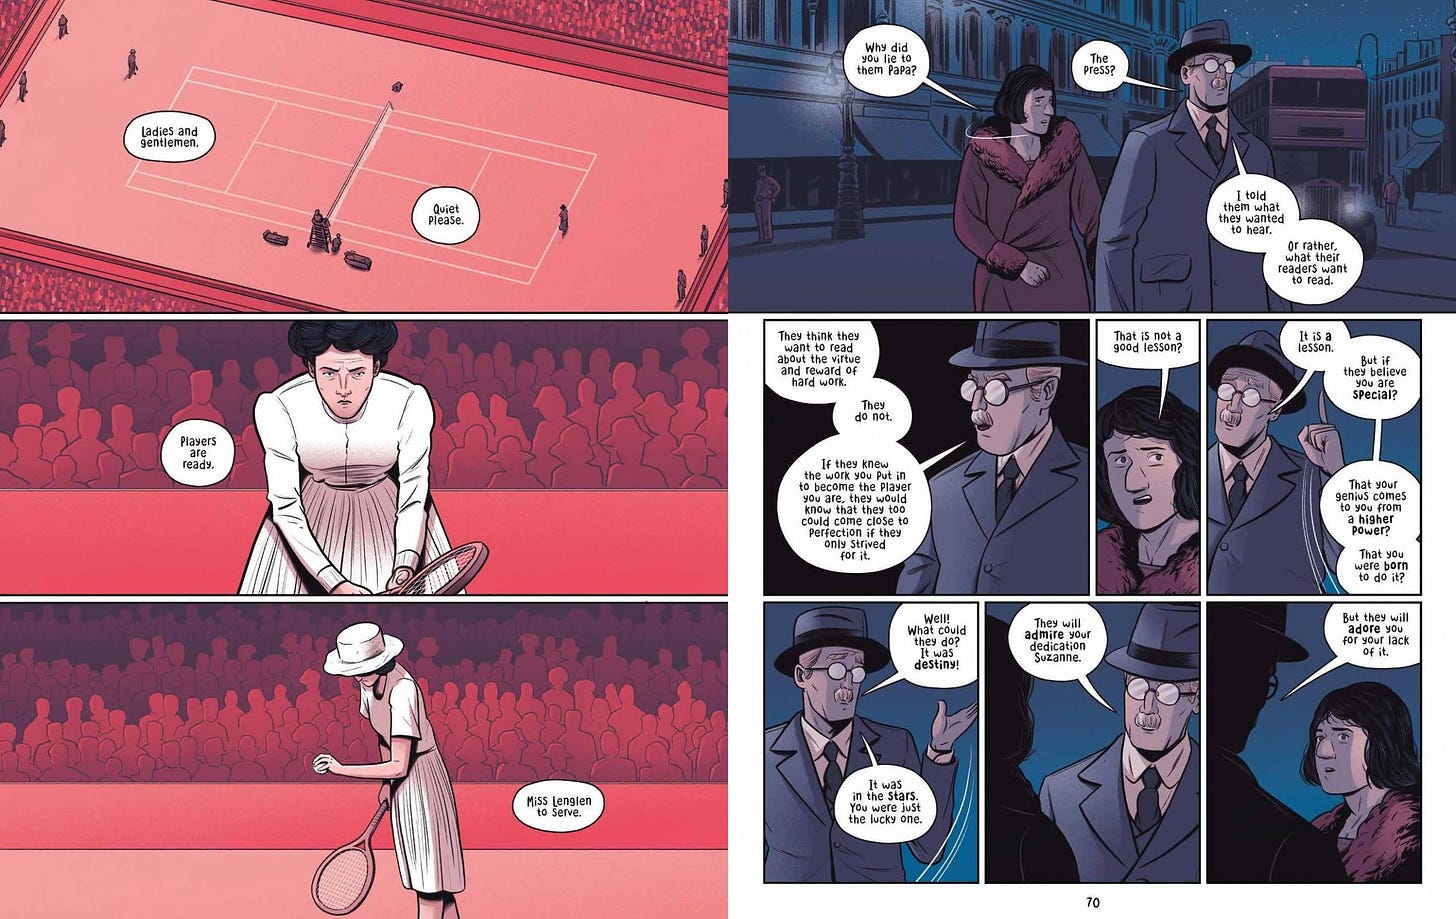 Two page spread from Suzanne depicting a tennis match in red tones and the aftermath in blue hues.